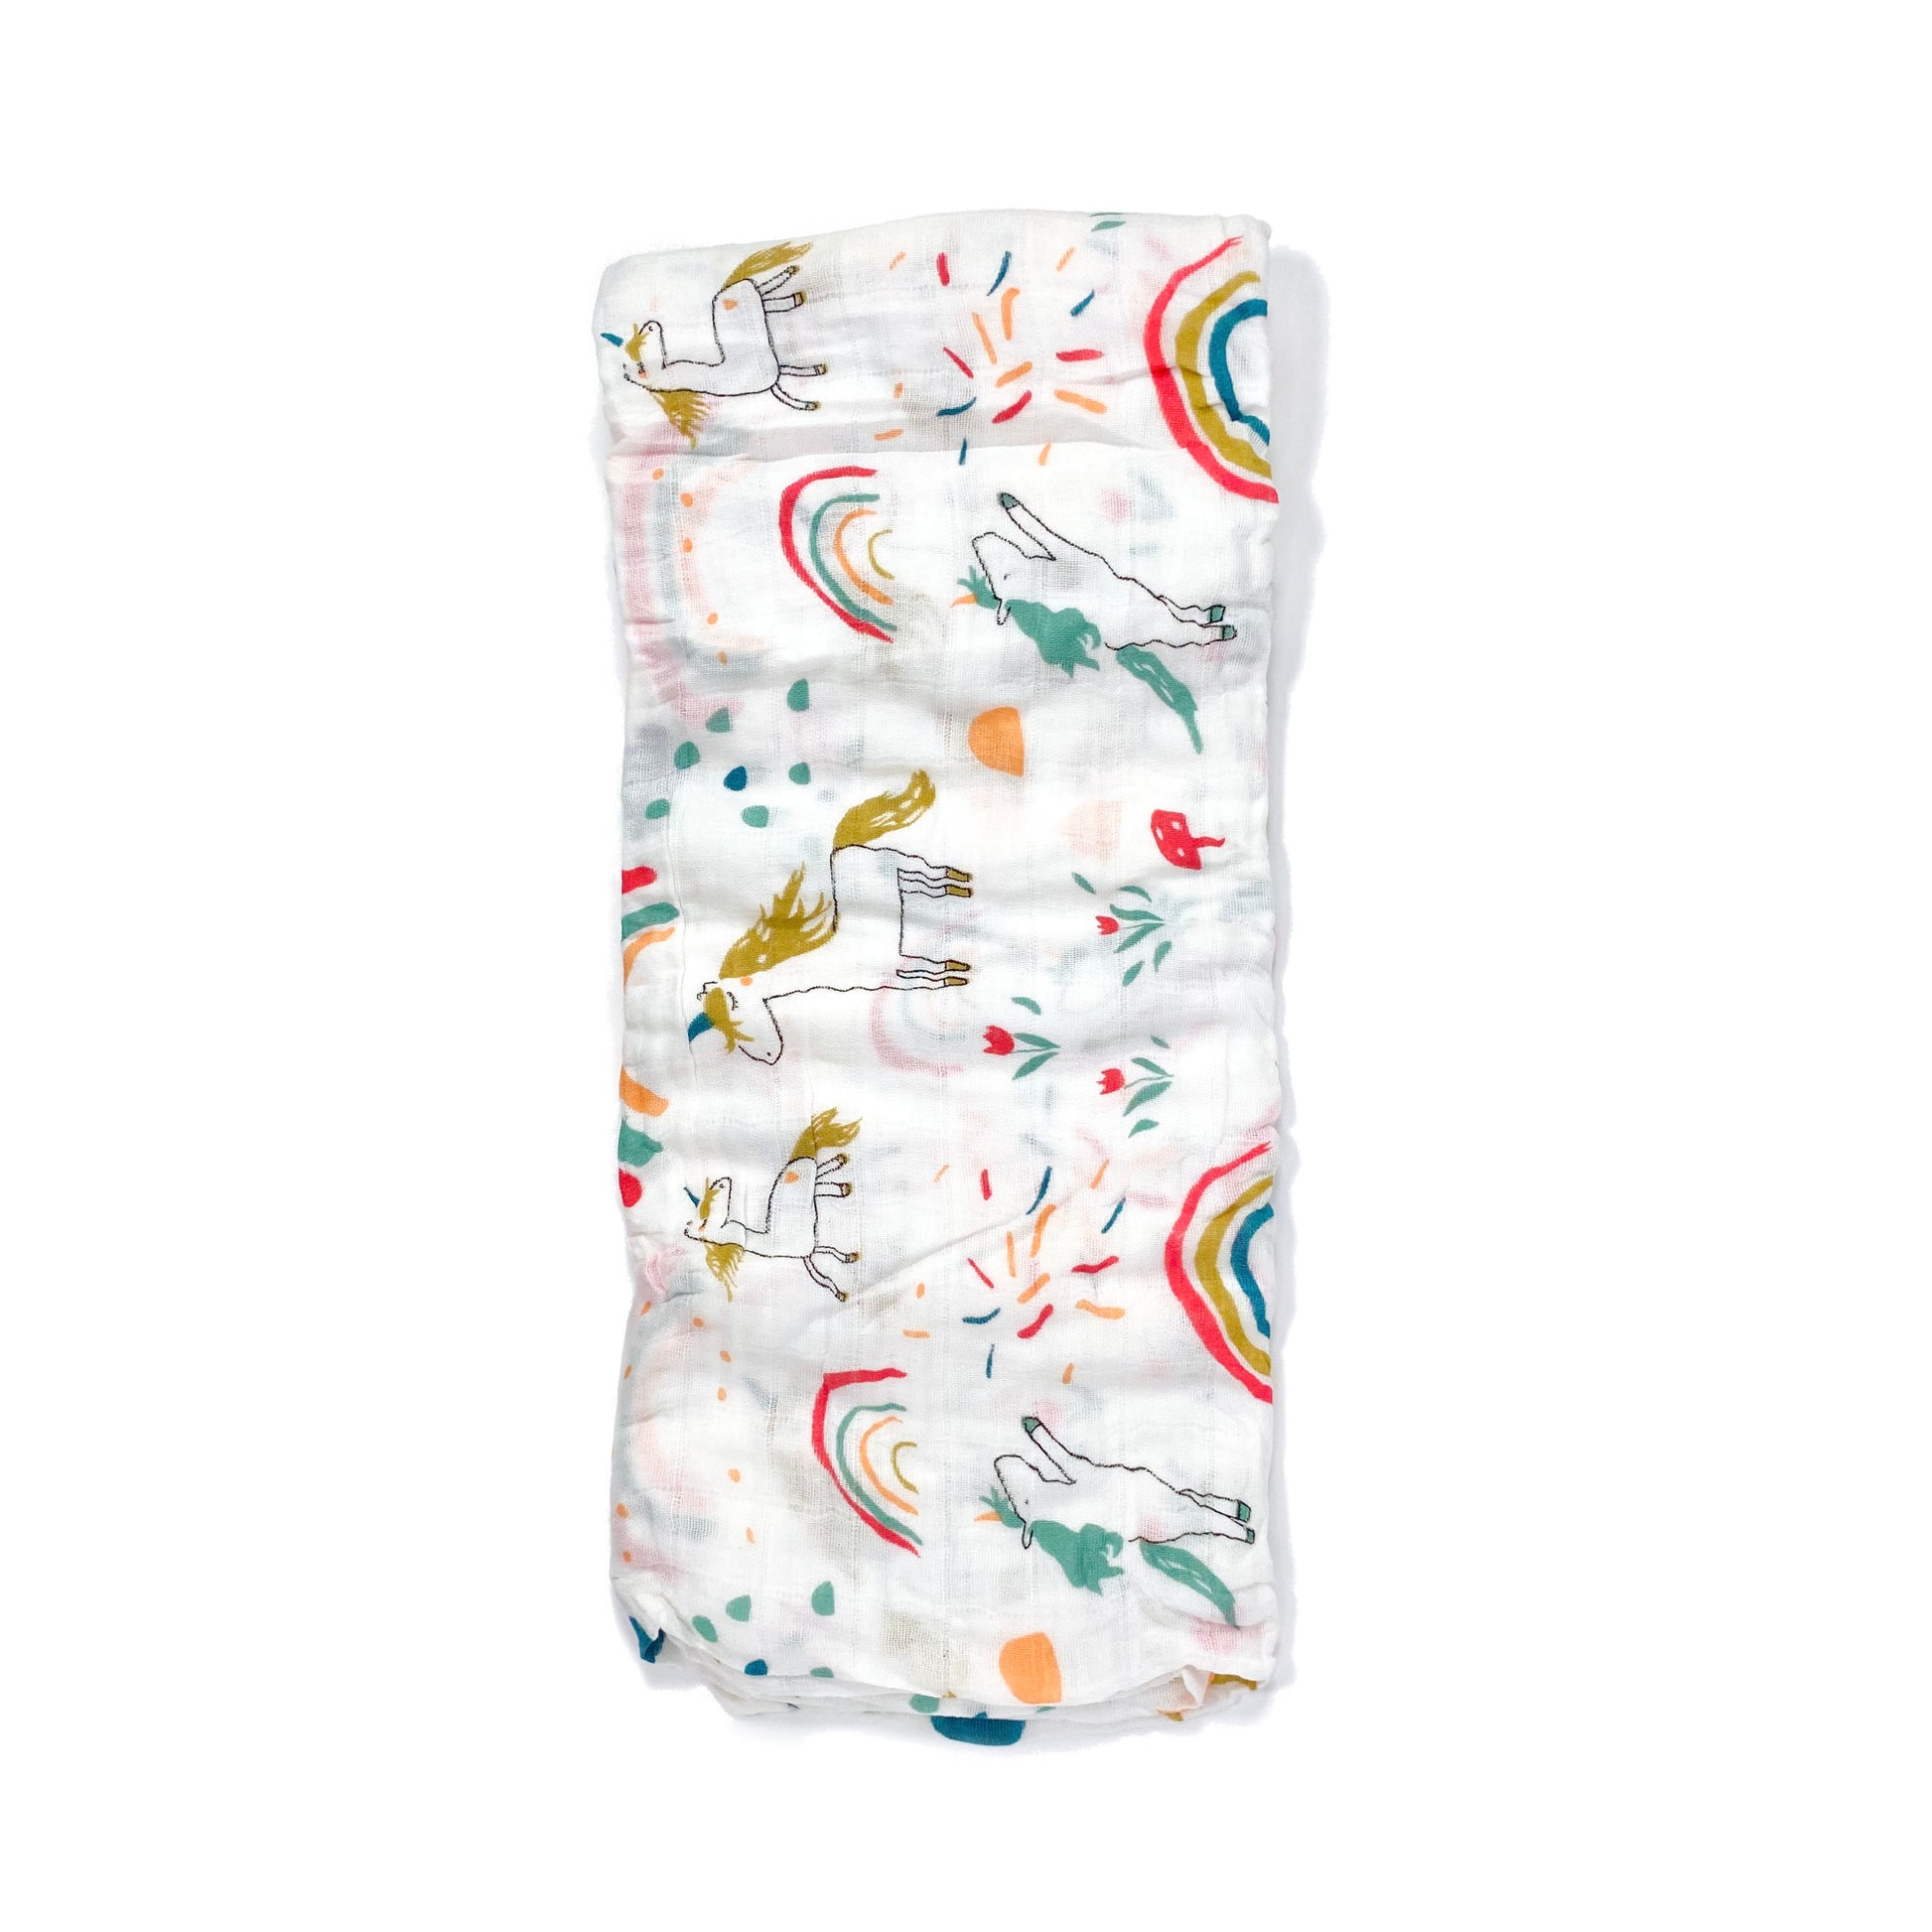 A muslin baby swaddle blanket made from bamboo and cotton fibres, in a unicorn design.